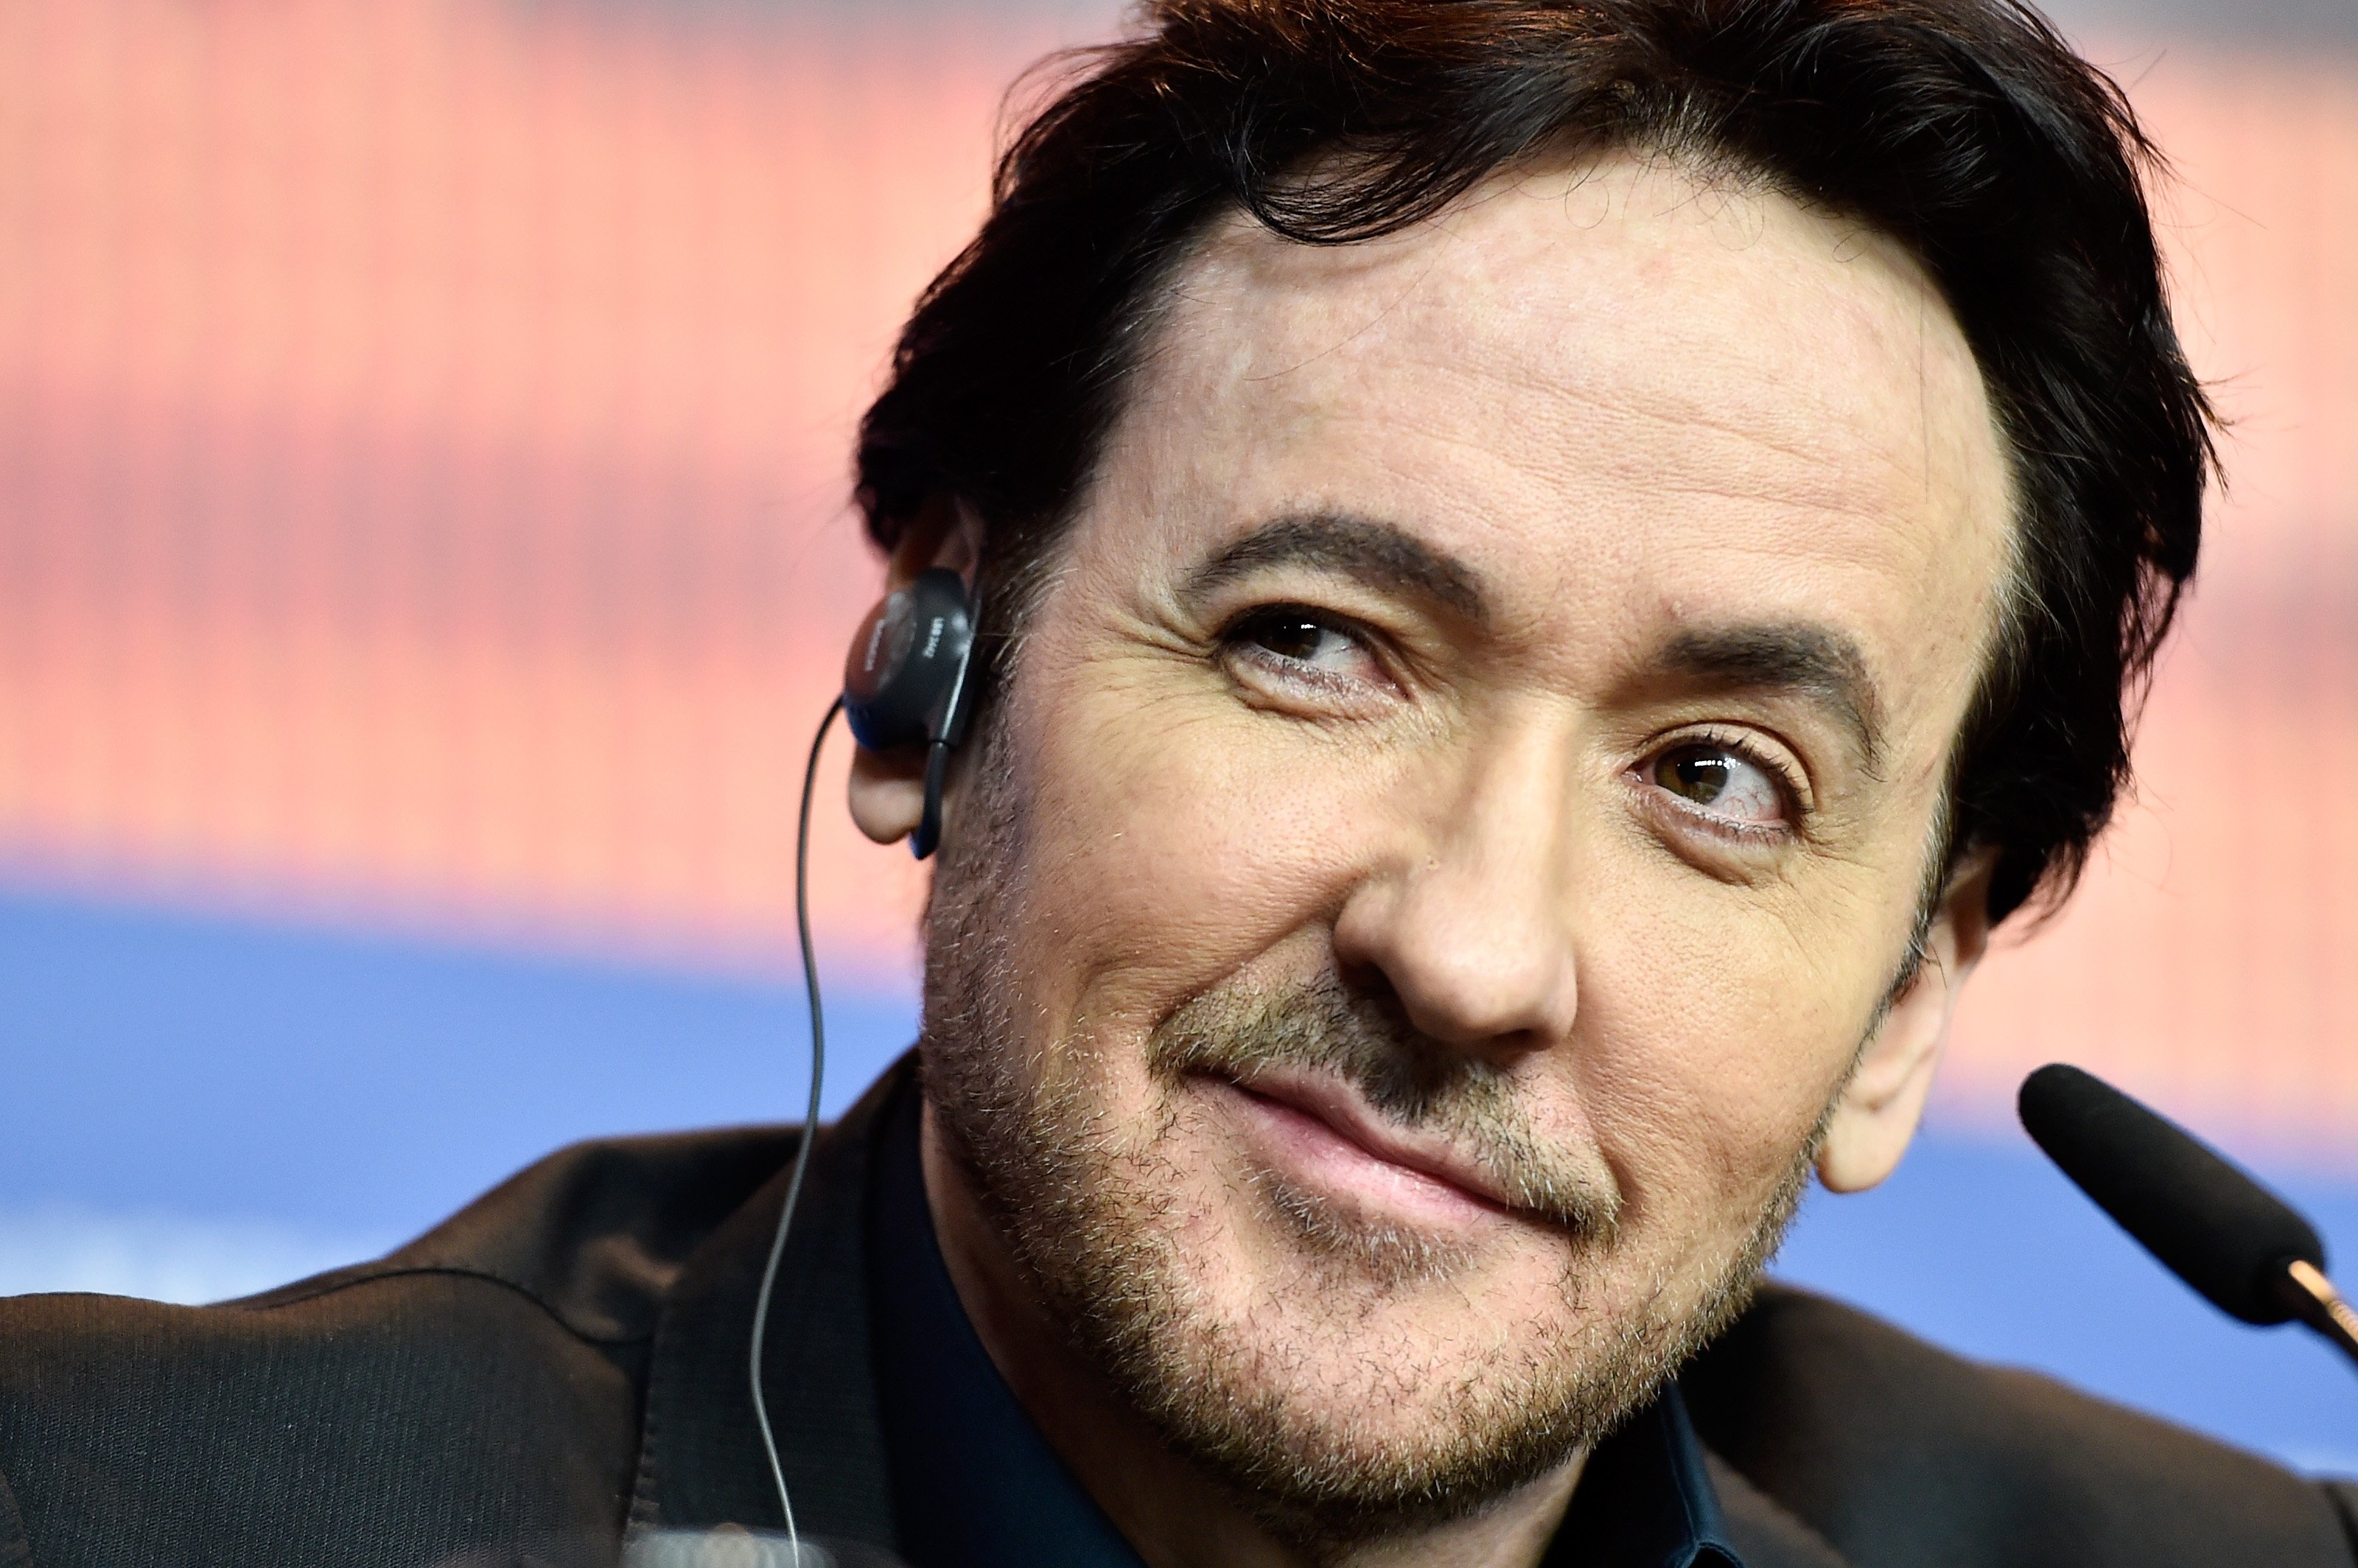 John Cusack at the "Chi-Raq" press conference at the 66th Berlin International Film Festival in 2016. | Source: Getty Images